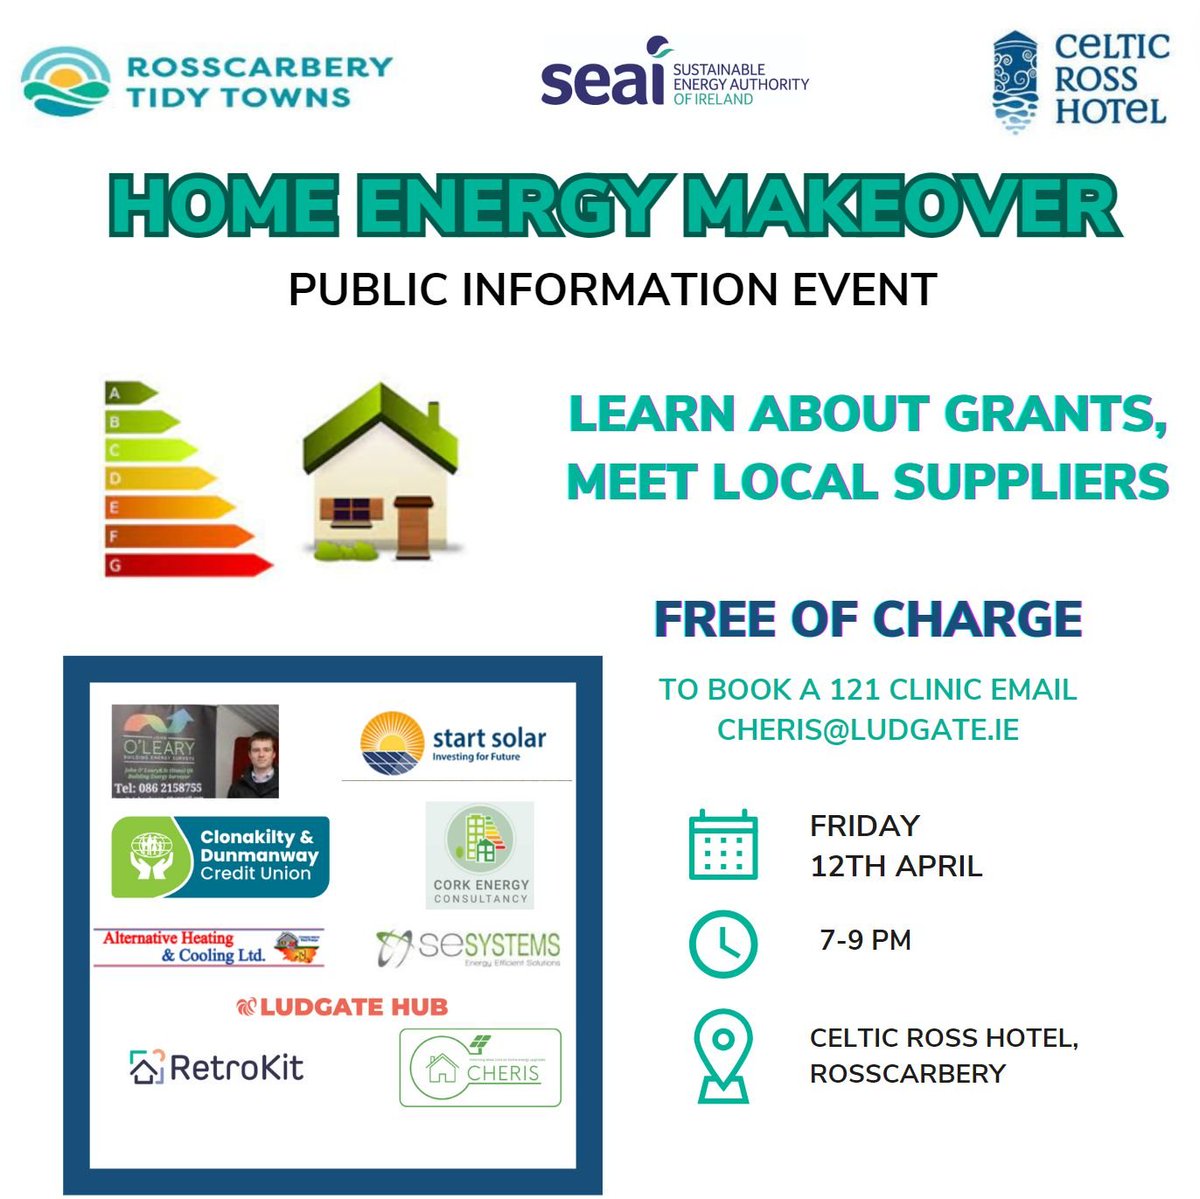 Can't wait for this event on 12th April @CelticRossHotel @RossWestCork . Organised by Rosscarbery #TidyTowns Lots of info for anyone in #WestCork carrying out low energy upgrades to their home. All welcome and free of charge. @SEAI_ie @RetroKit_EU @TidyTownsIre @ludgate_hub